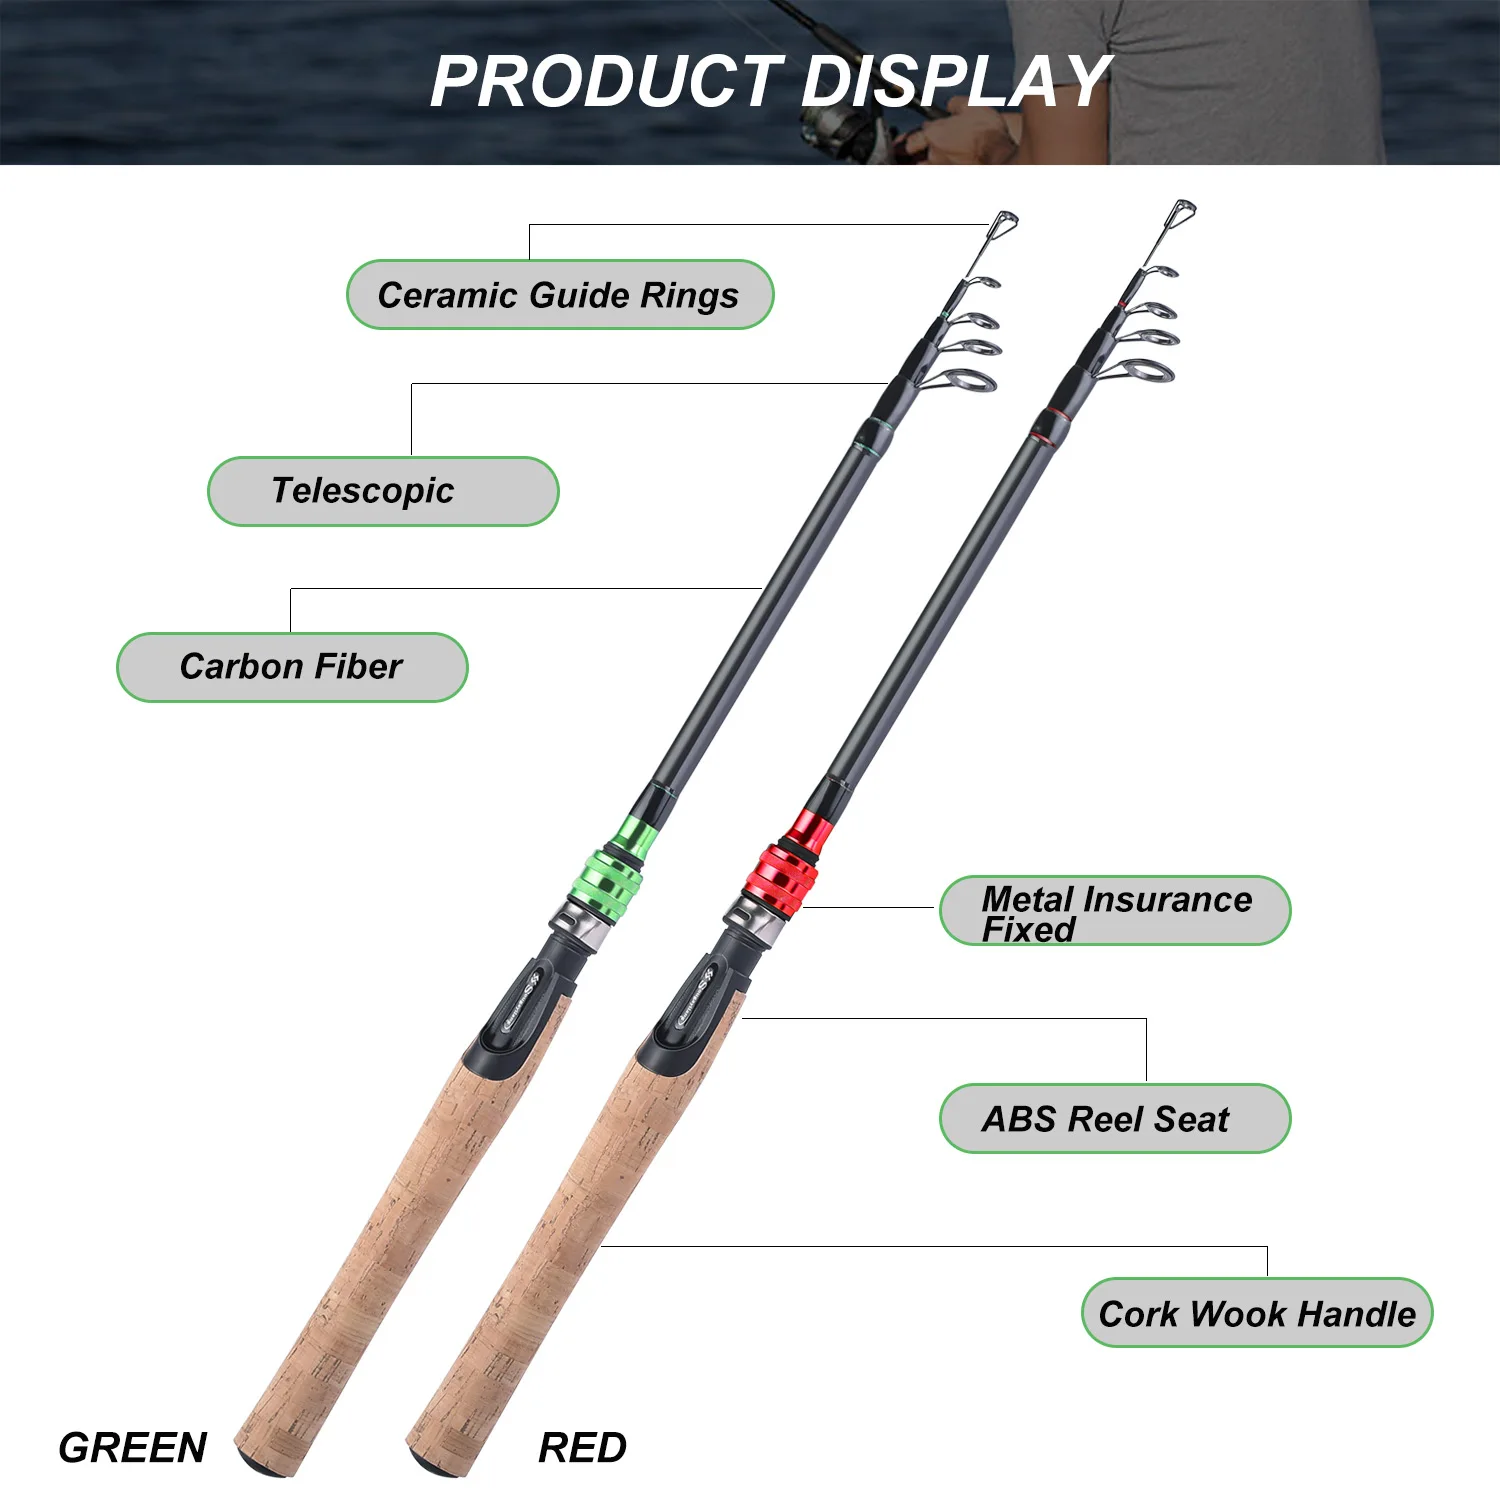 5 NEW Telescopic Fishing Rods 7ft 2.1M 5 Lineaeffe Fishing Reels Line 